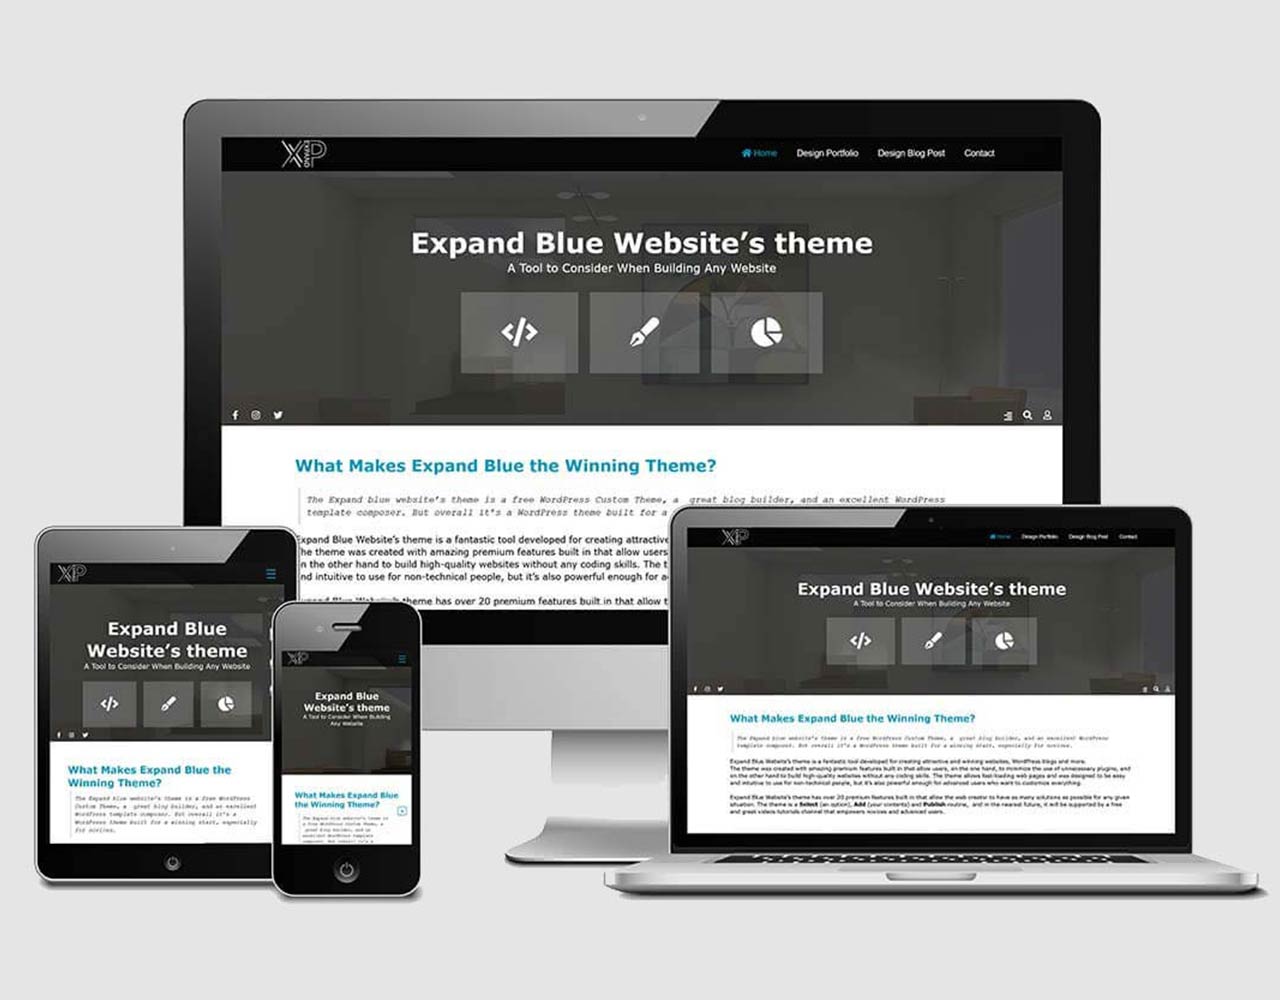 Design Project - WordPress Design and Development for Expand Blue